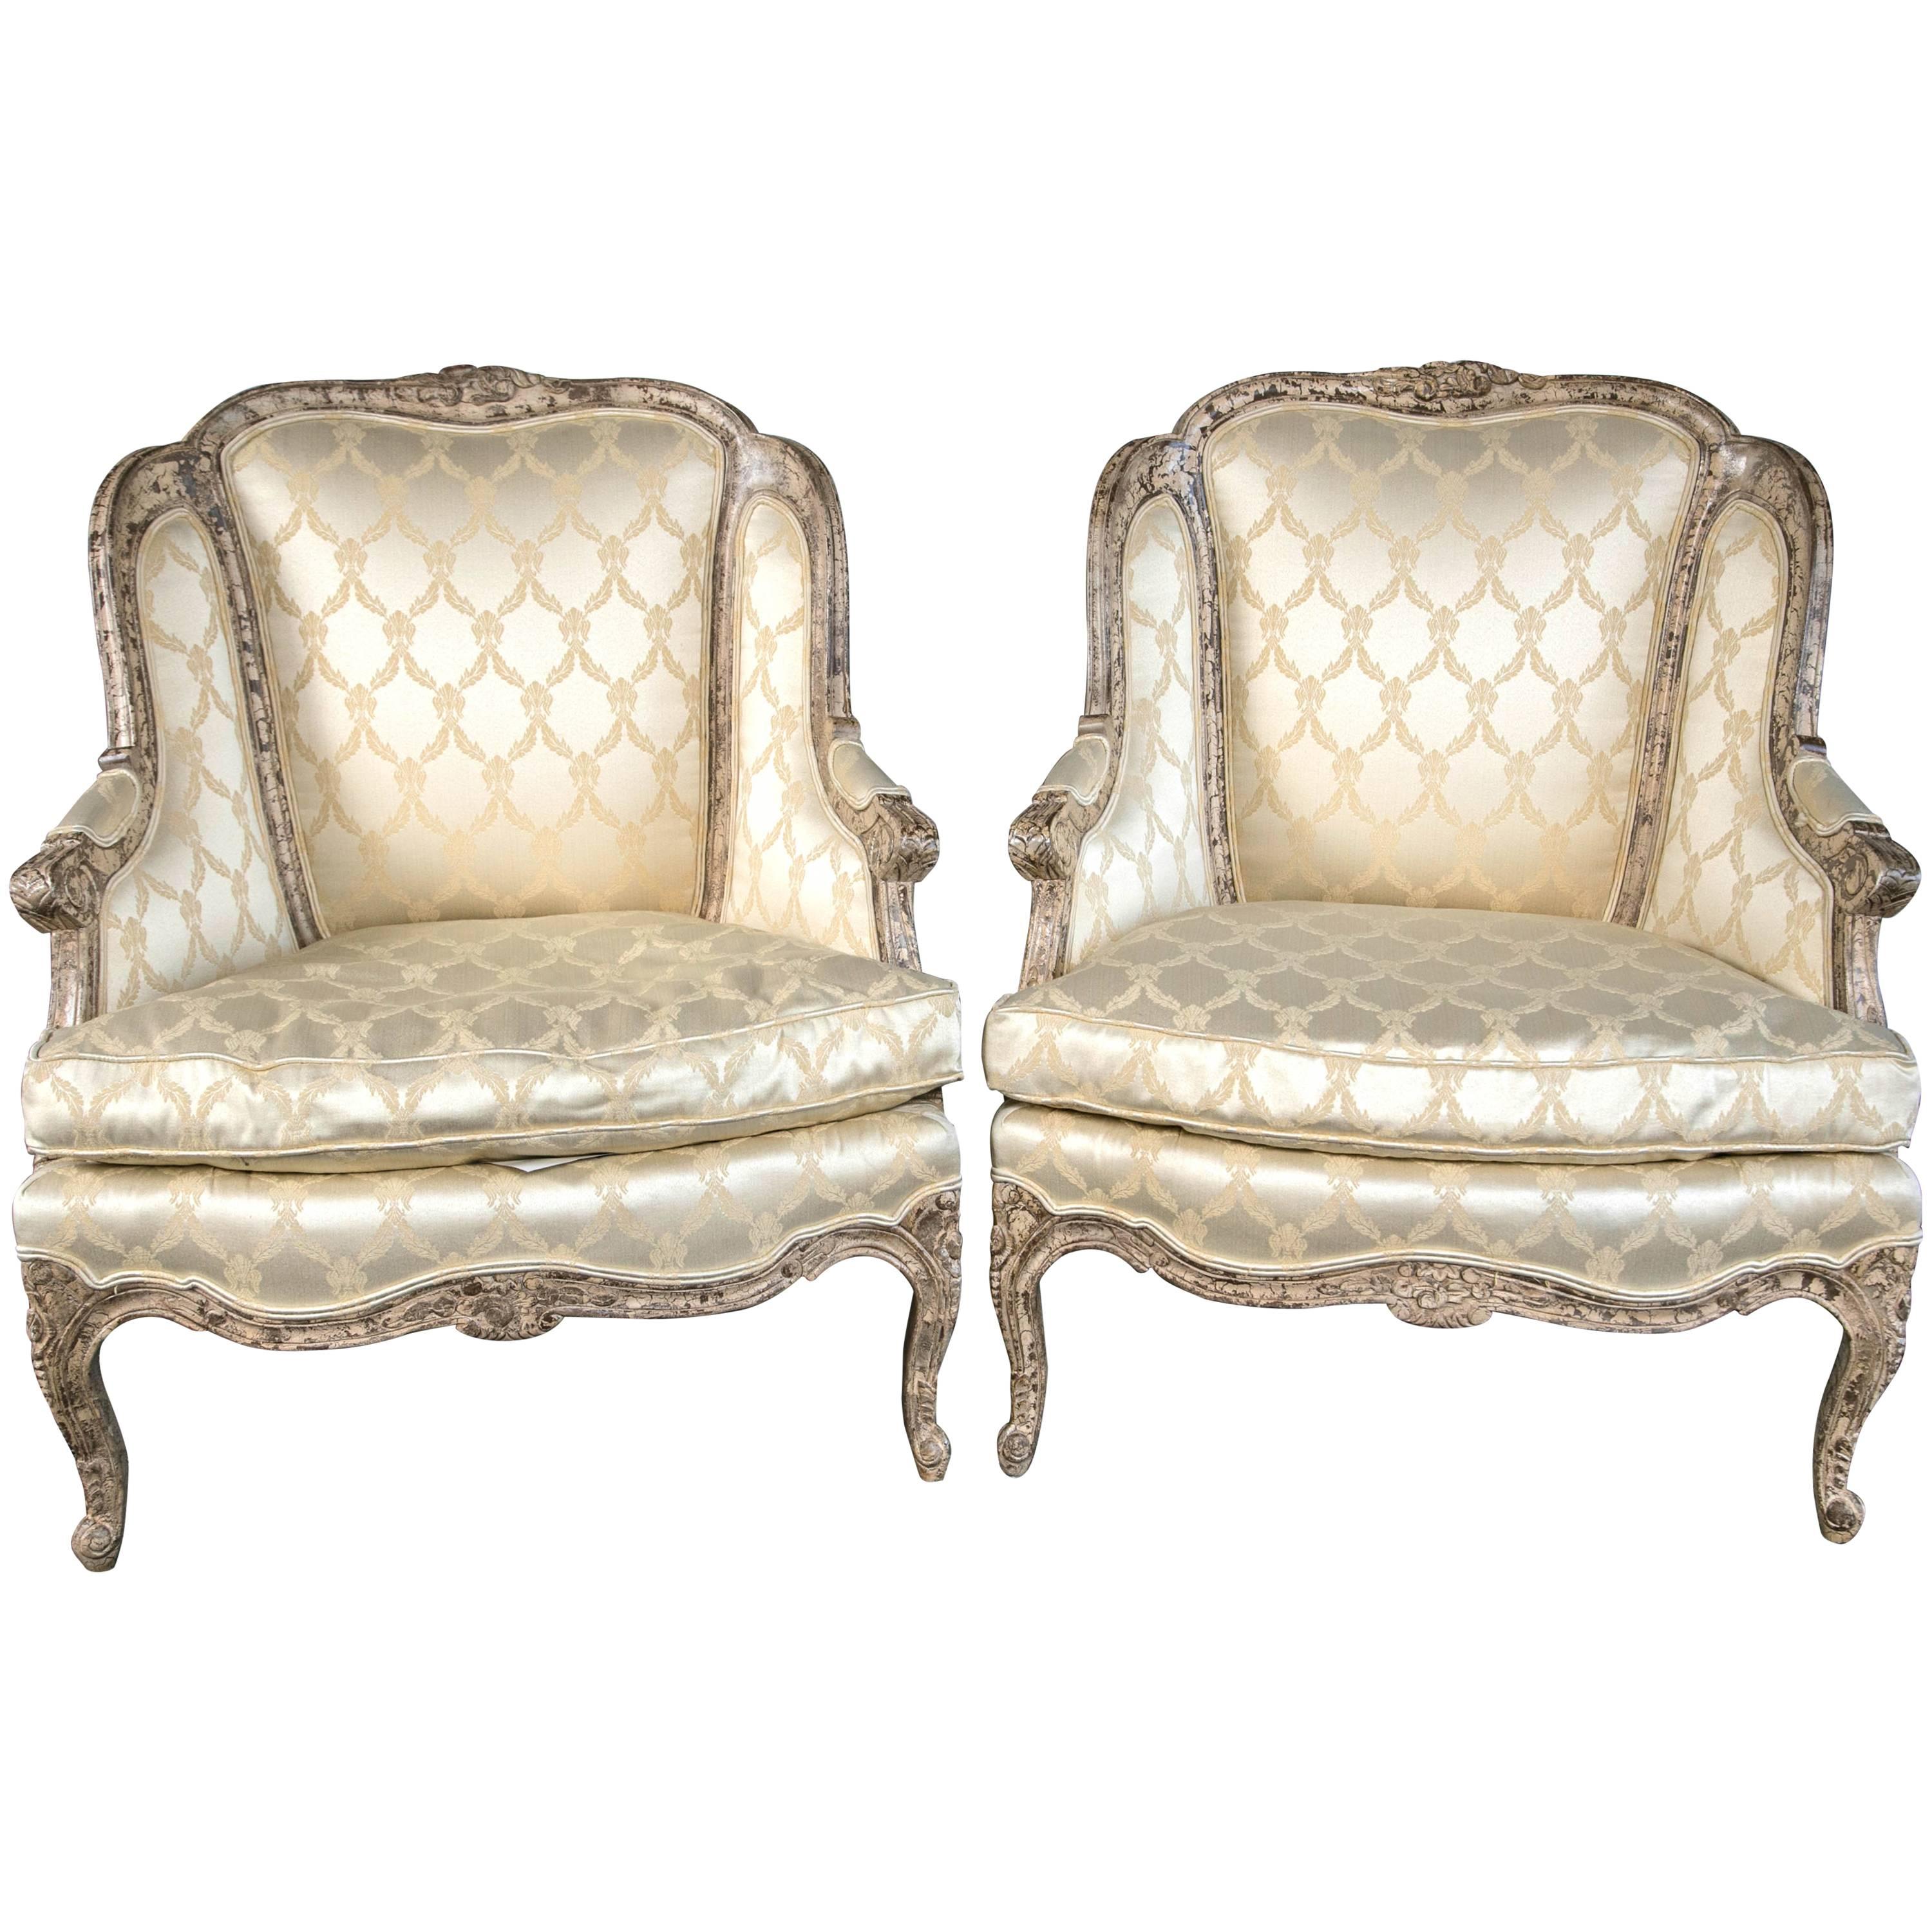 Pair of Louis XV Style Bergere Chairs in the Manner of Jansen